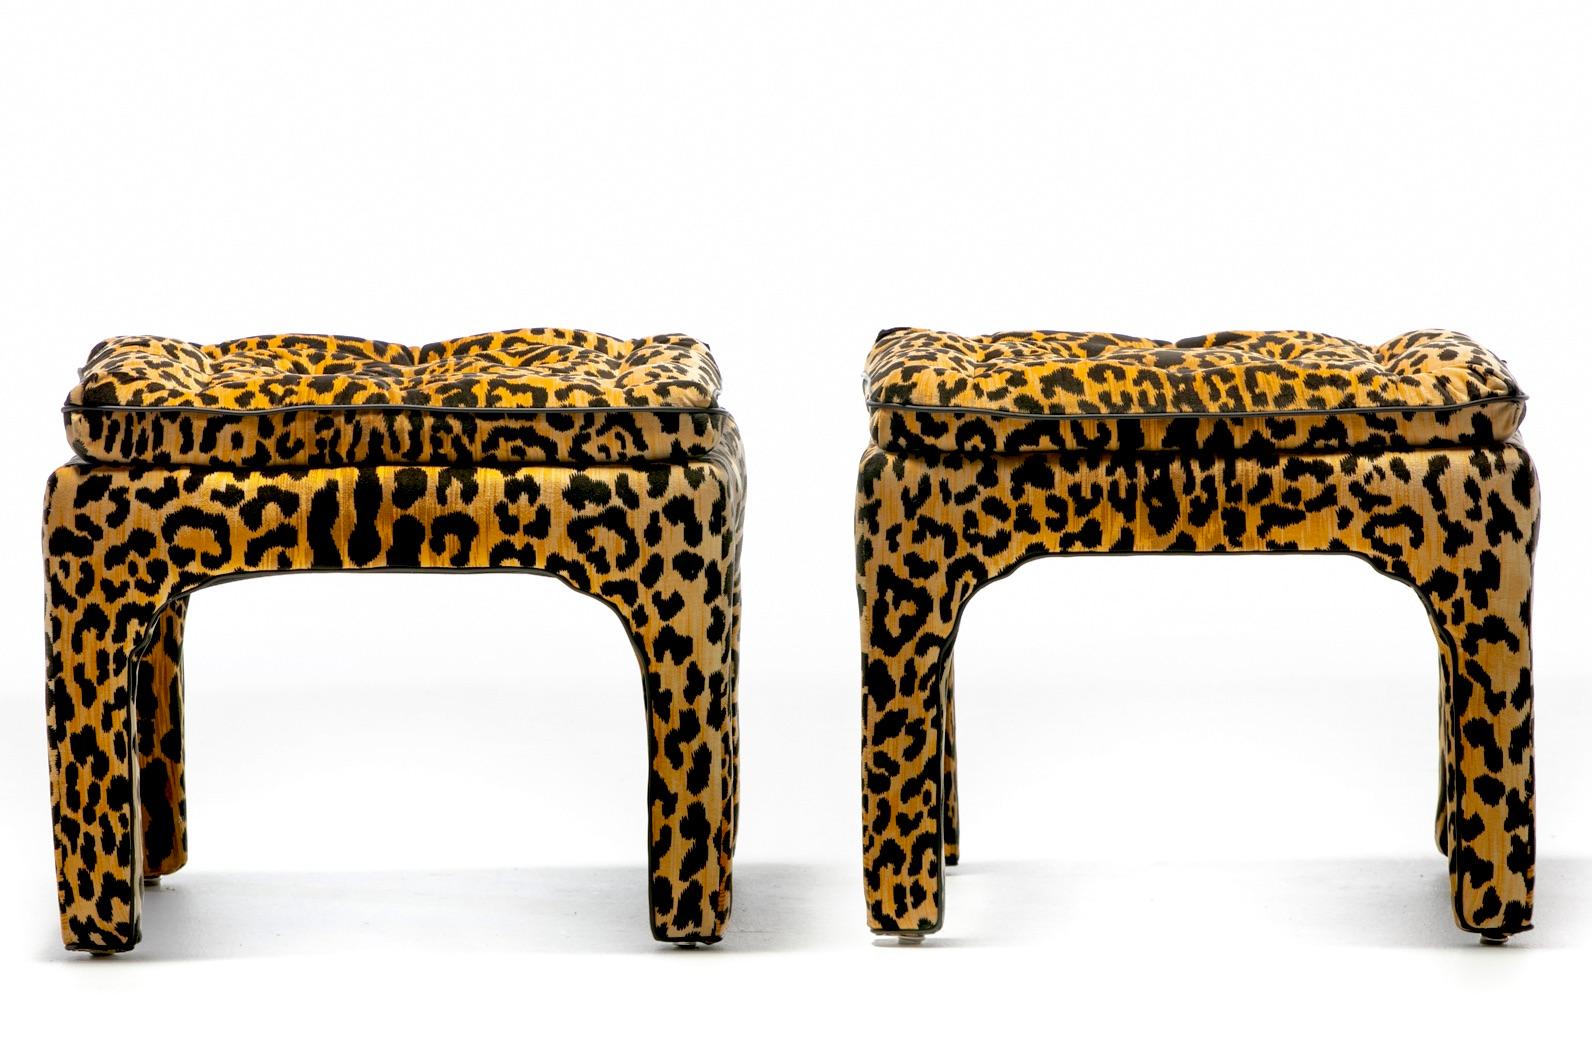 Pair of Billy Baldwin Style Leopard Velvet Stools with Leather Piping c. 1970s For Sale 4